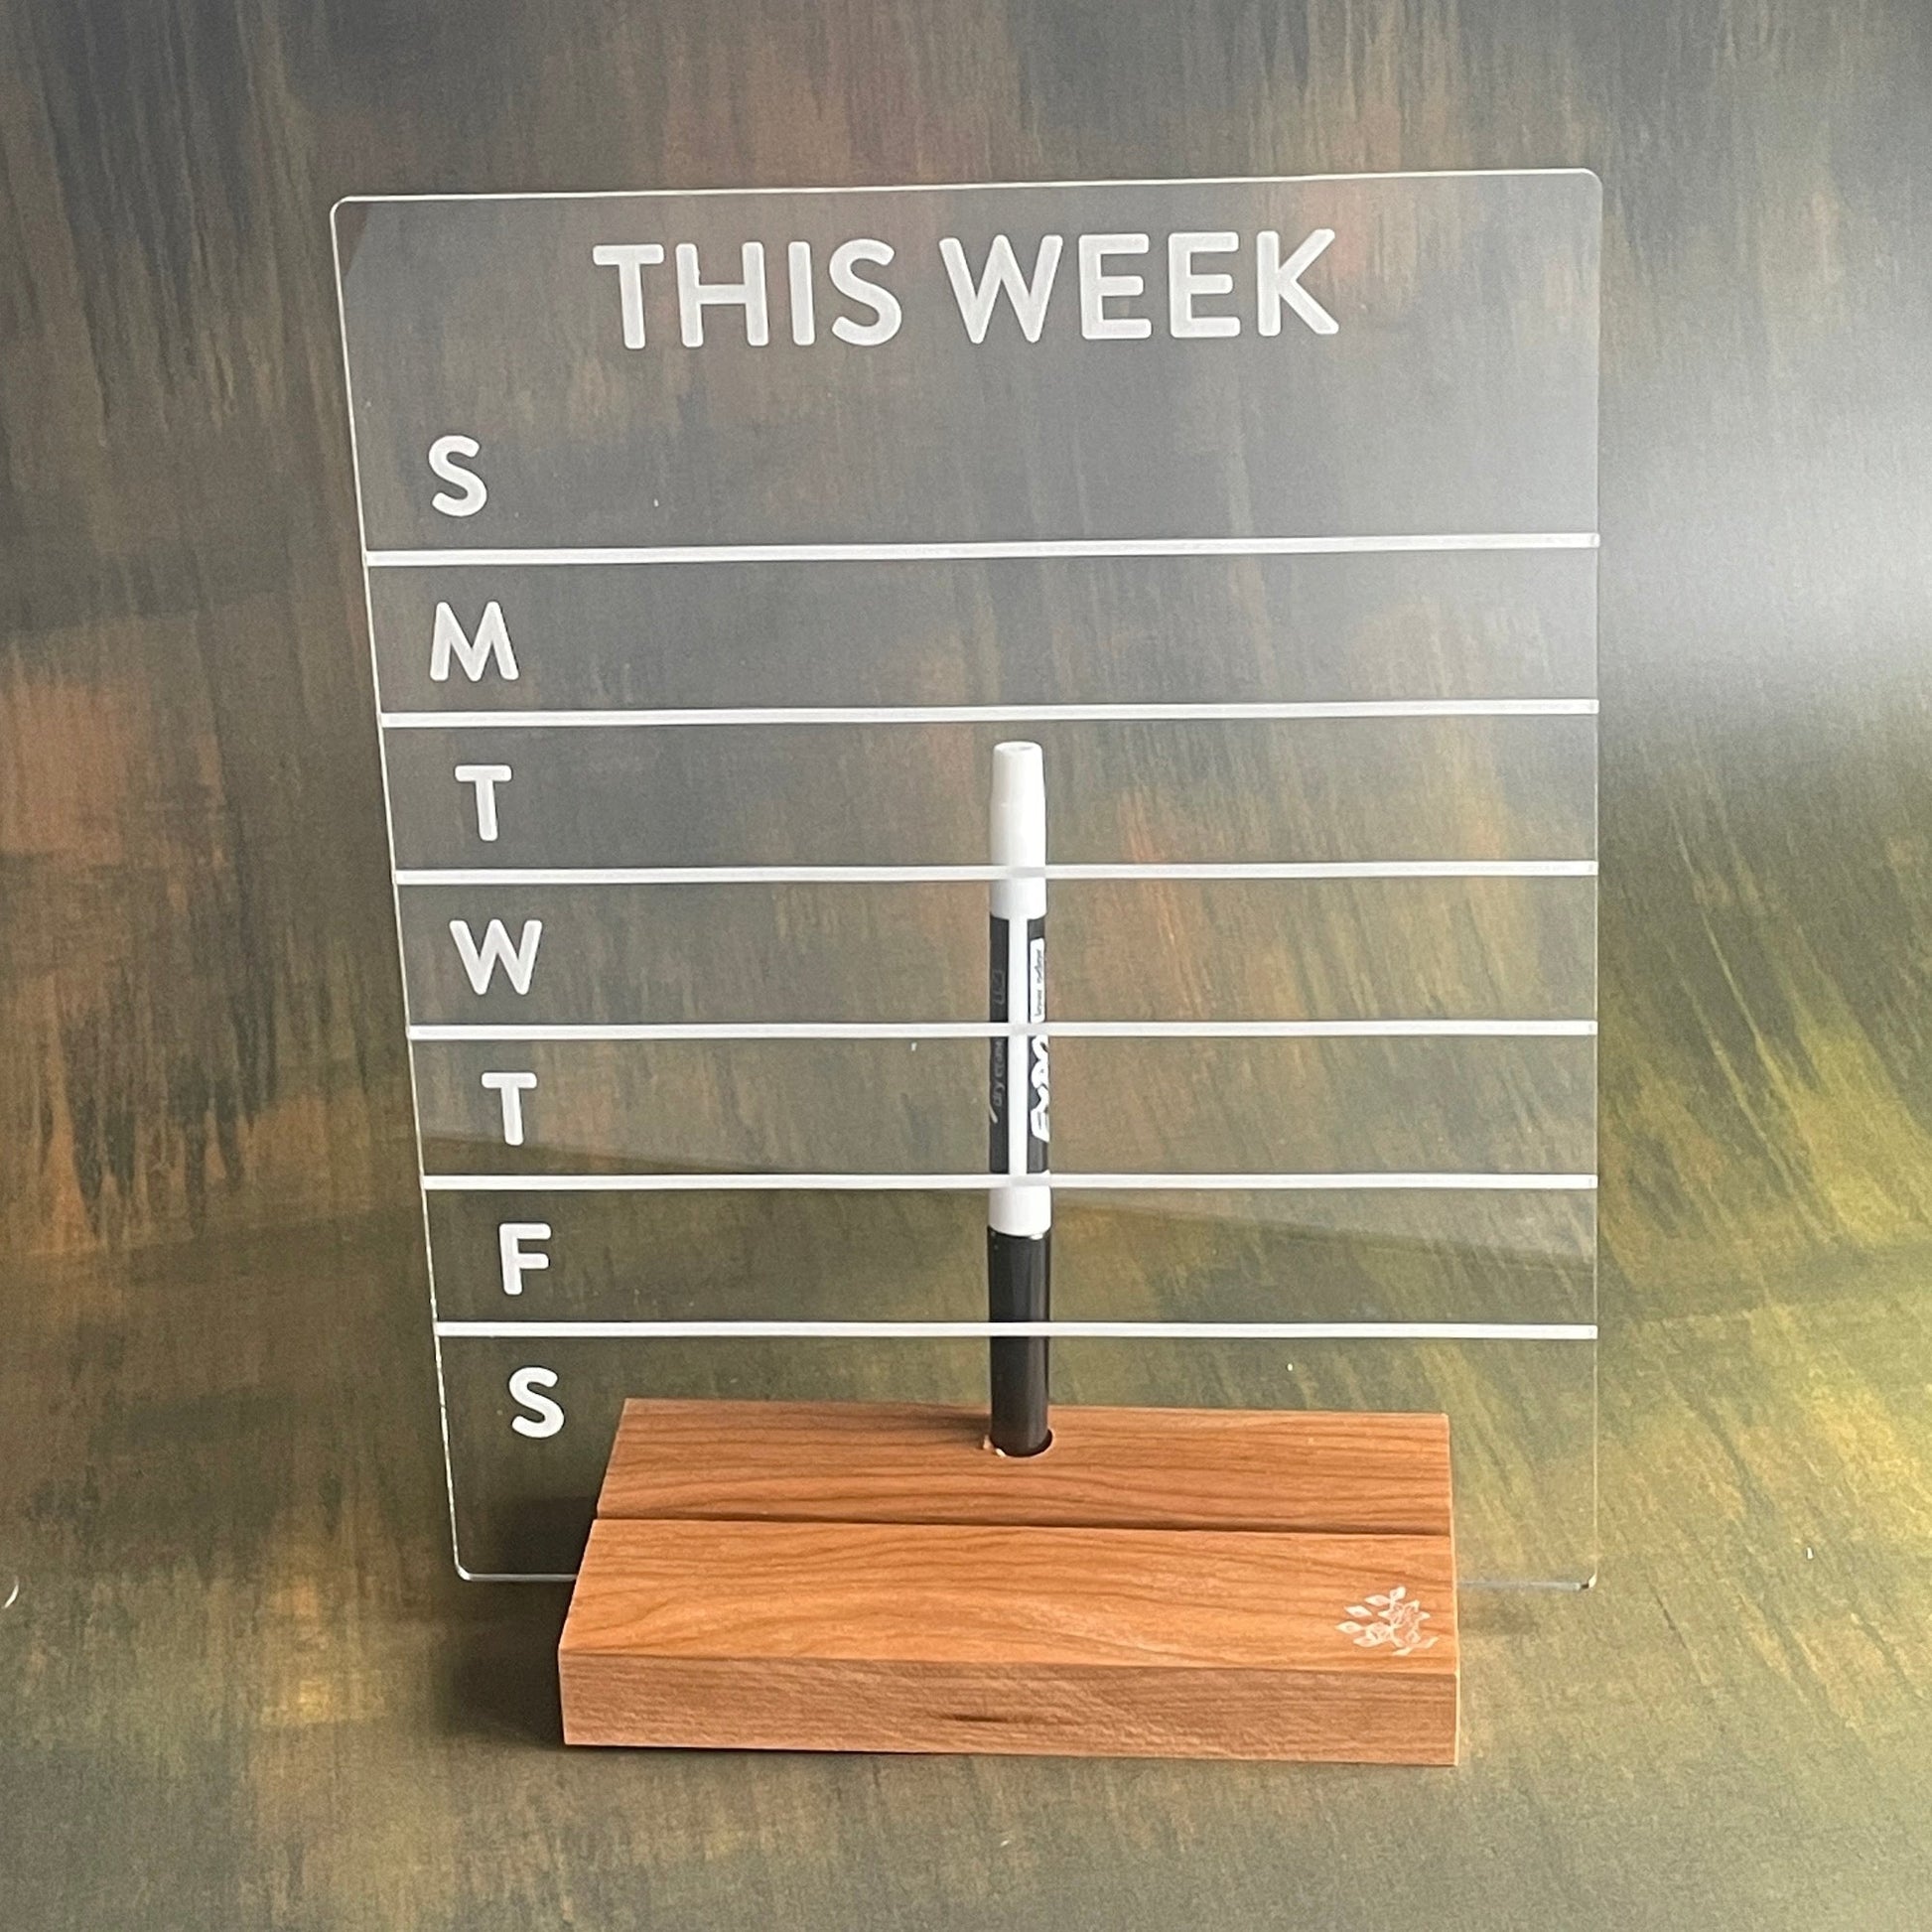 Dry-Erase Weekly Calendar - laser cut and laser engraved clear acrylic with solid wood base - by LeeMo Designs in Bend, Oregon